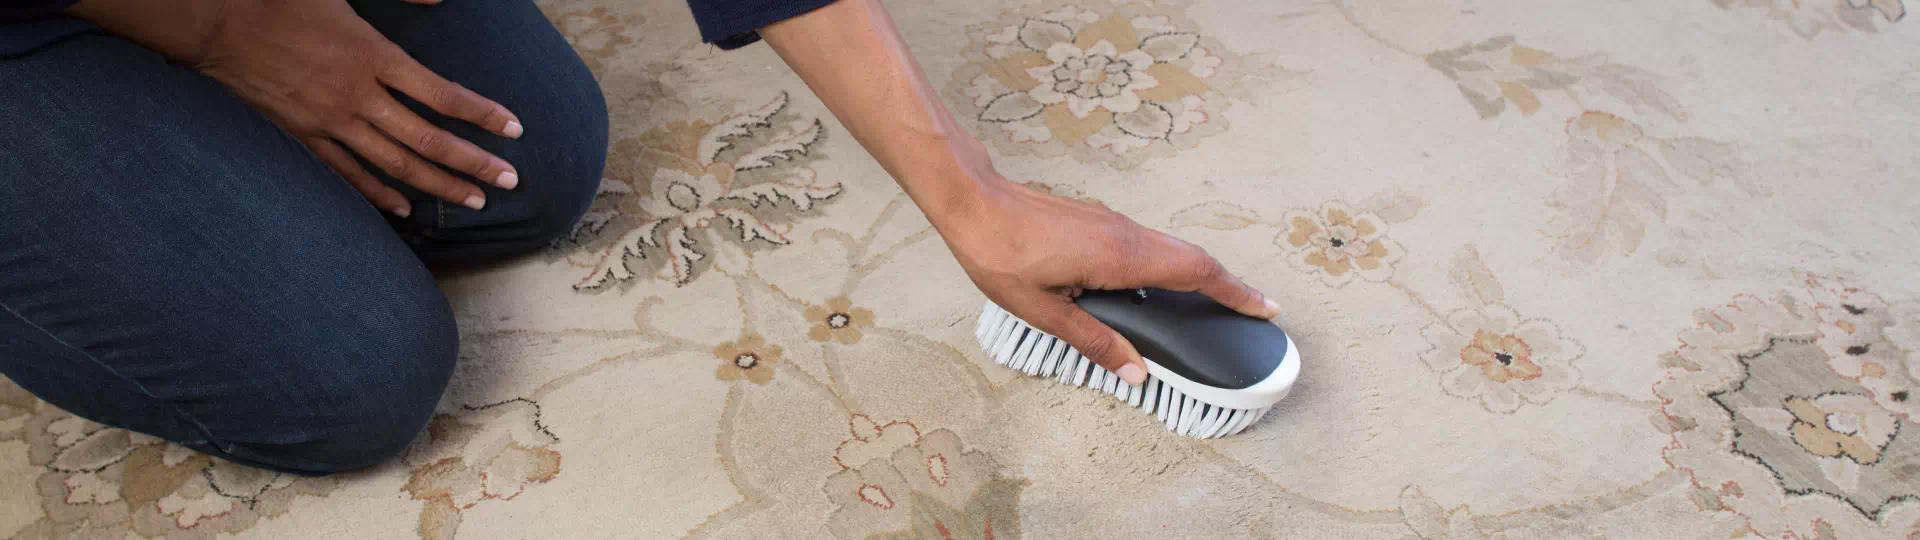 Residential Carpet Cleaning In Idaho Falls